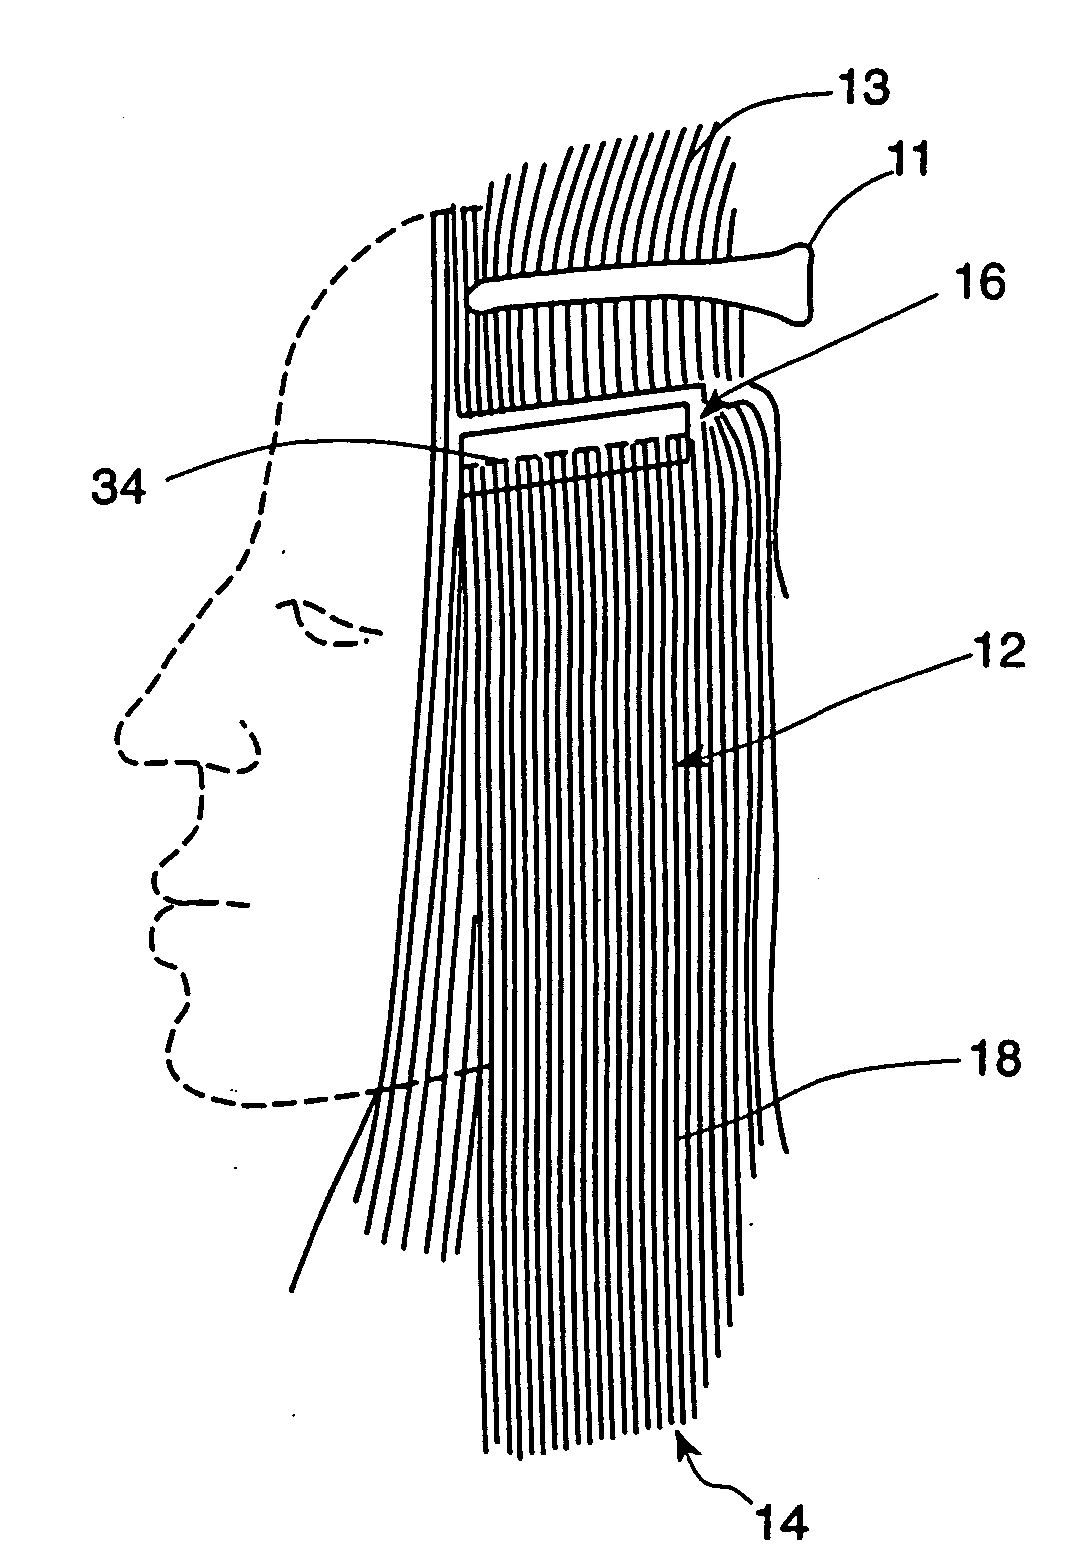 Hair extensions and method of attachment